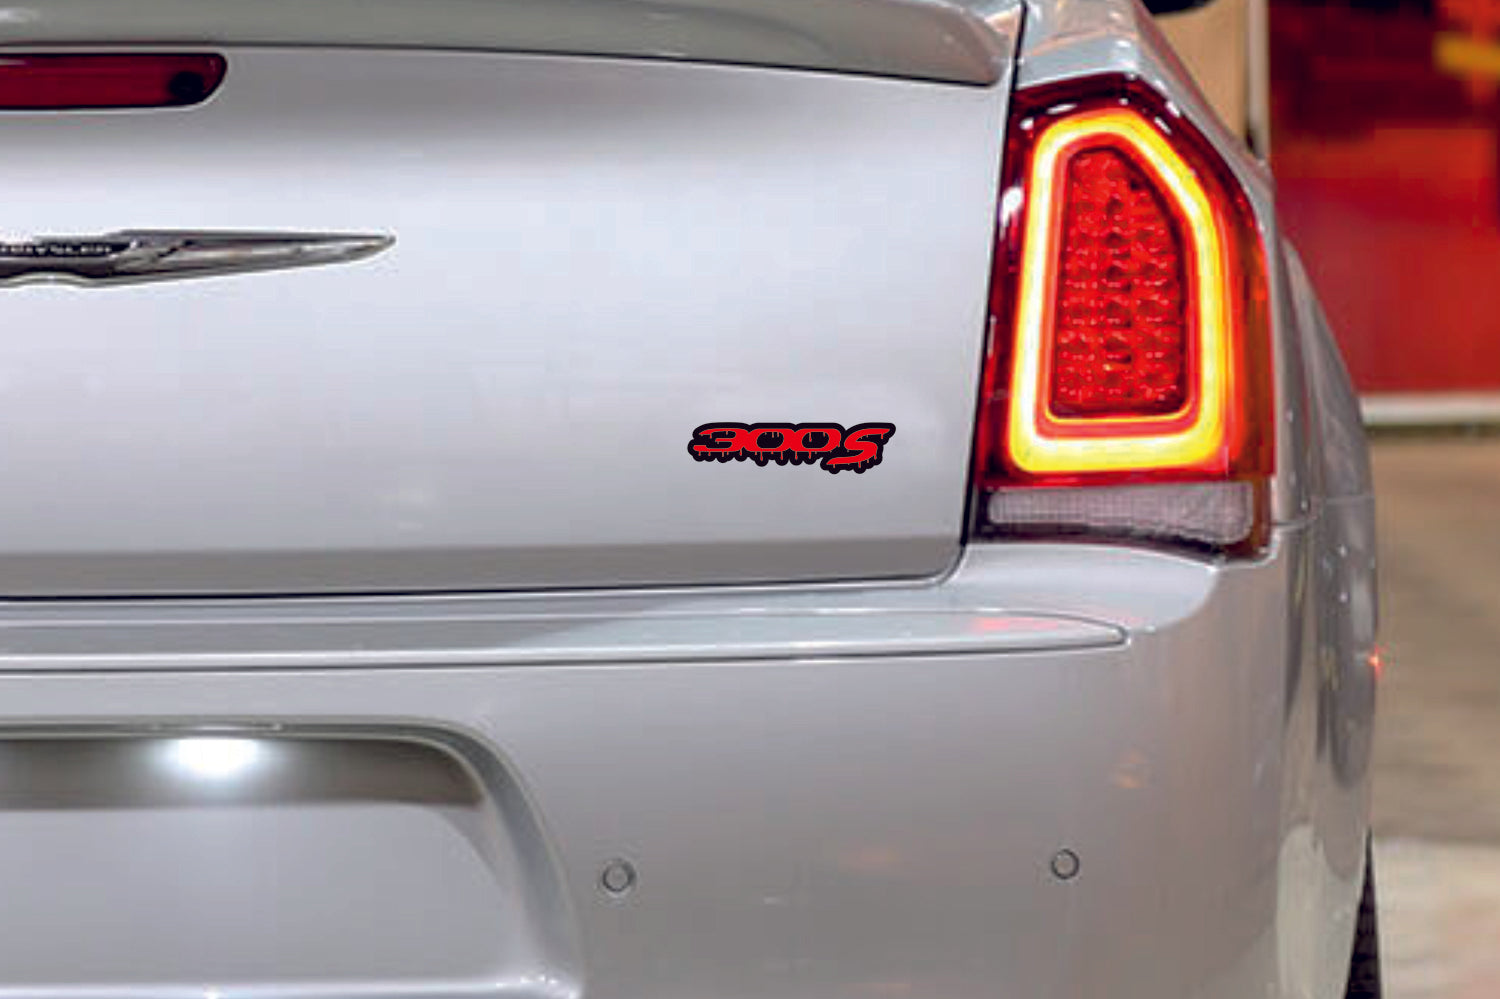 Chrysler tailgate trunk rear emblem with 300S Blood logo - decoinfabric